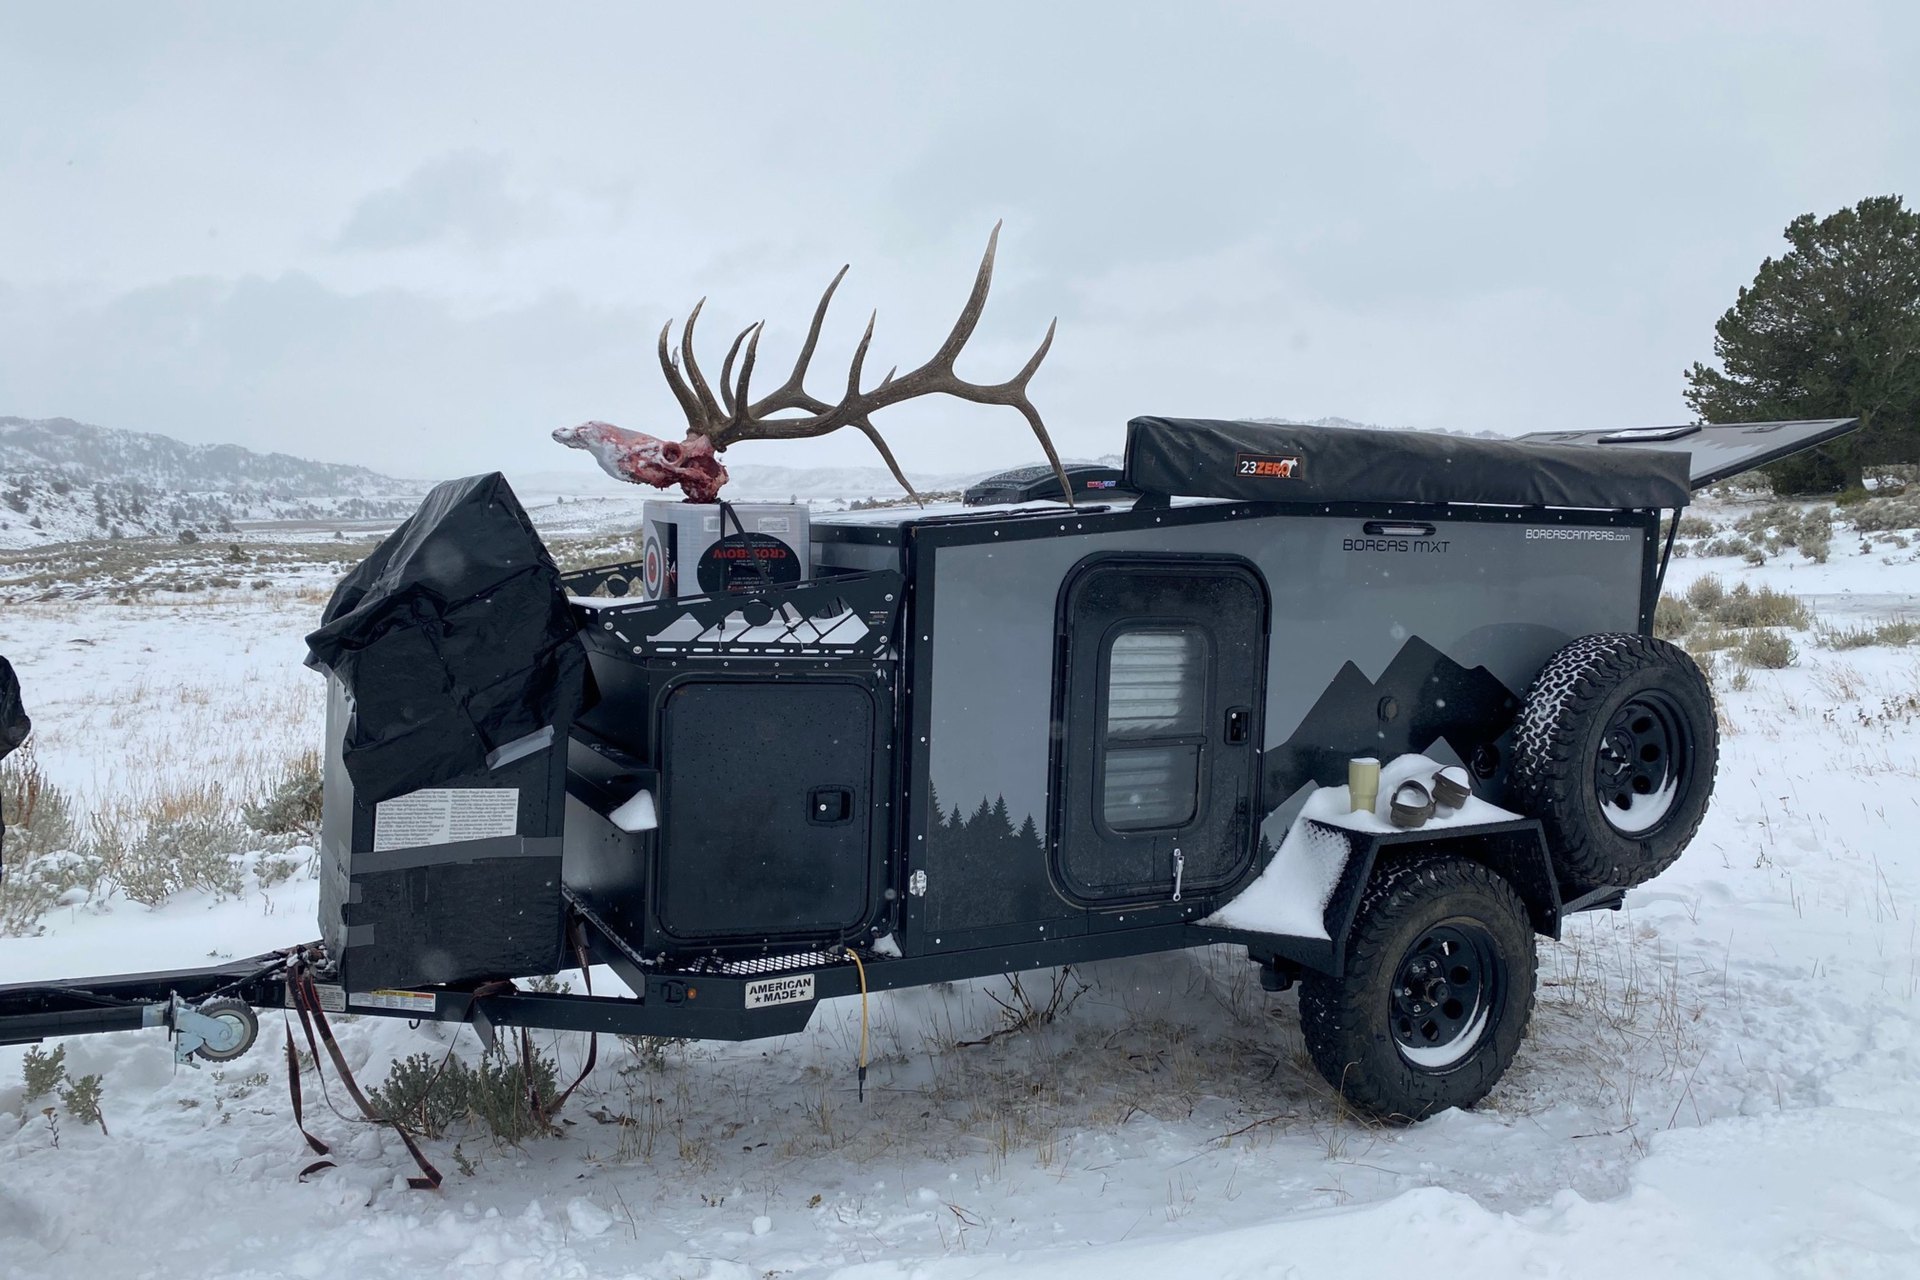 off-road camping trailer for hunting